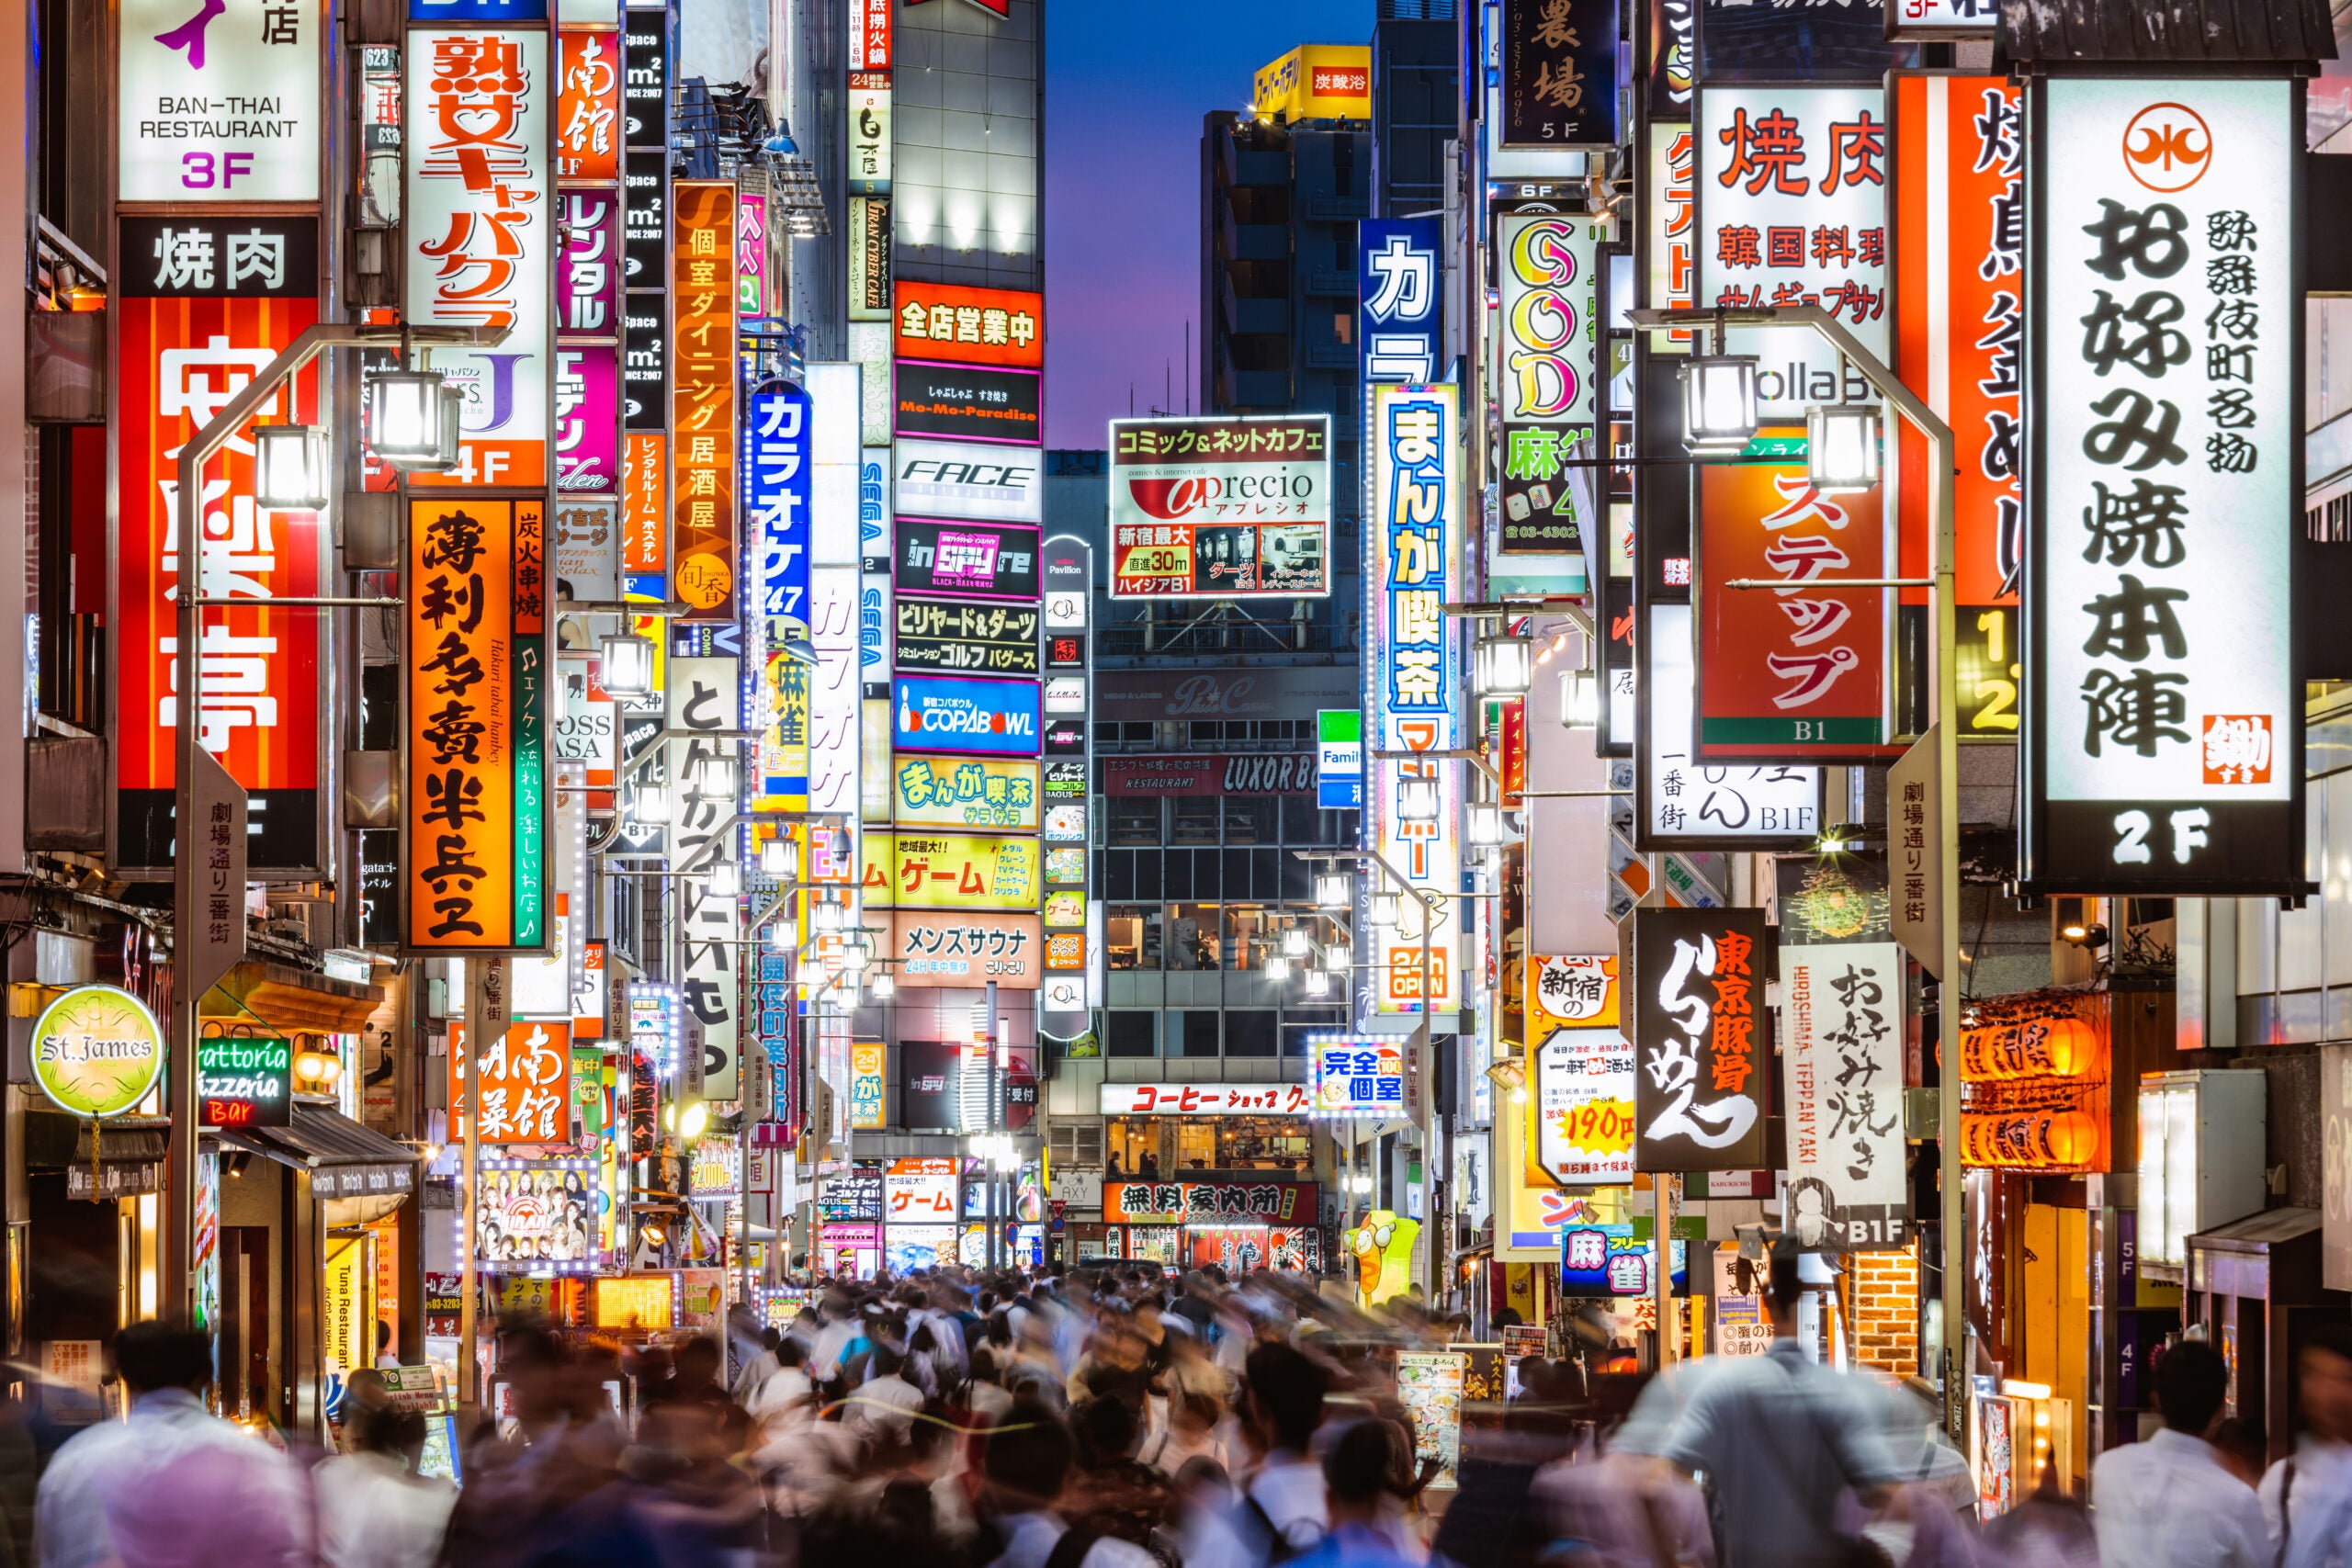 Fares from California and Hawaii to Tokyo for as low as $550 economy and $1,525 business